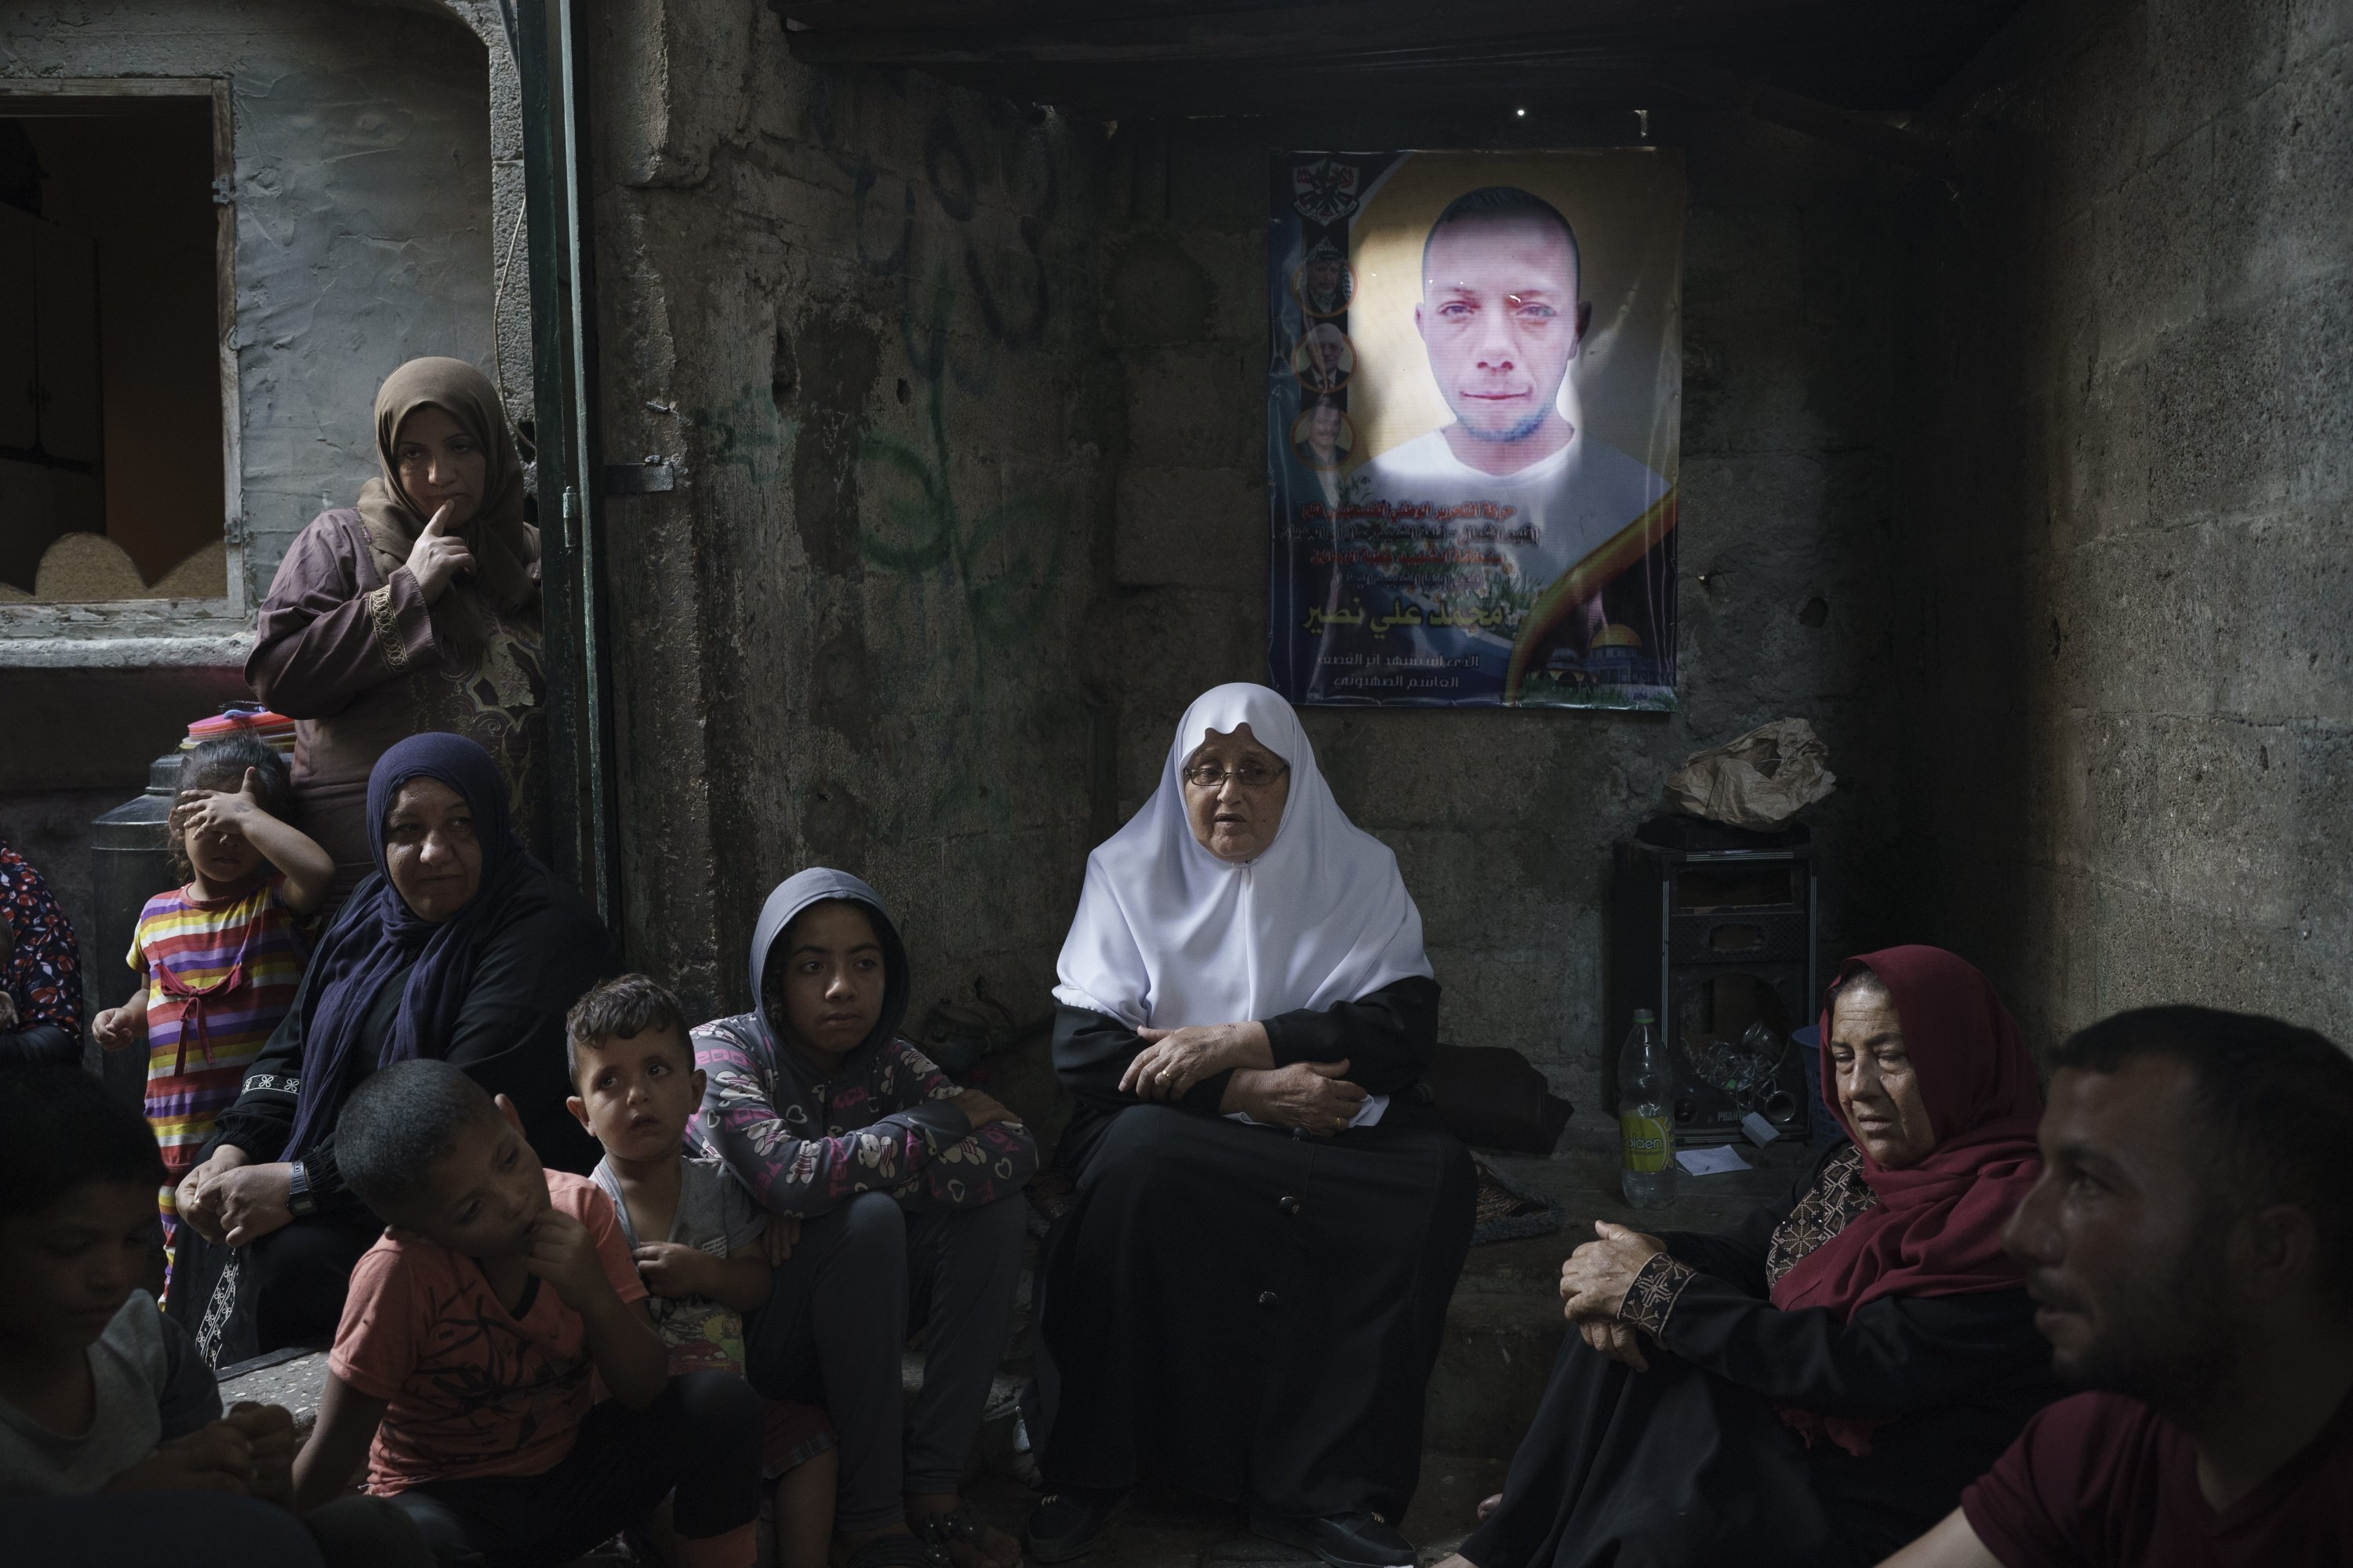 Members of the Nassir family sit under a poster of Mohamed Nassir, who died in the recent 11-day war between Israel and Hamas, June 12, 2021 in Beit Hanoun, northern Gaza, Palestine. (AP Photo)